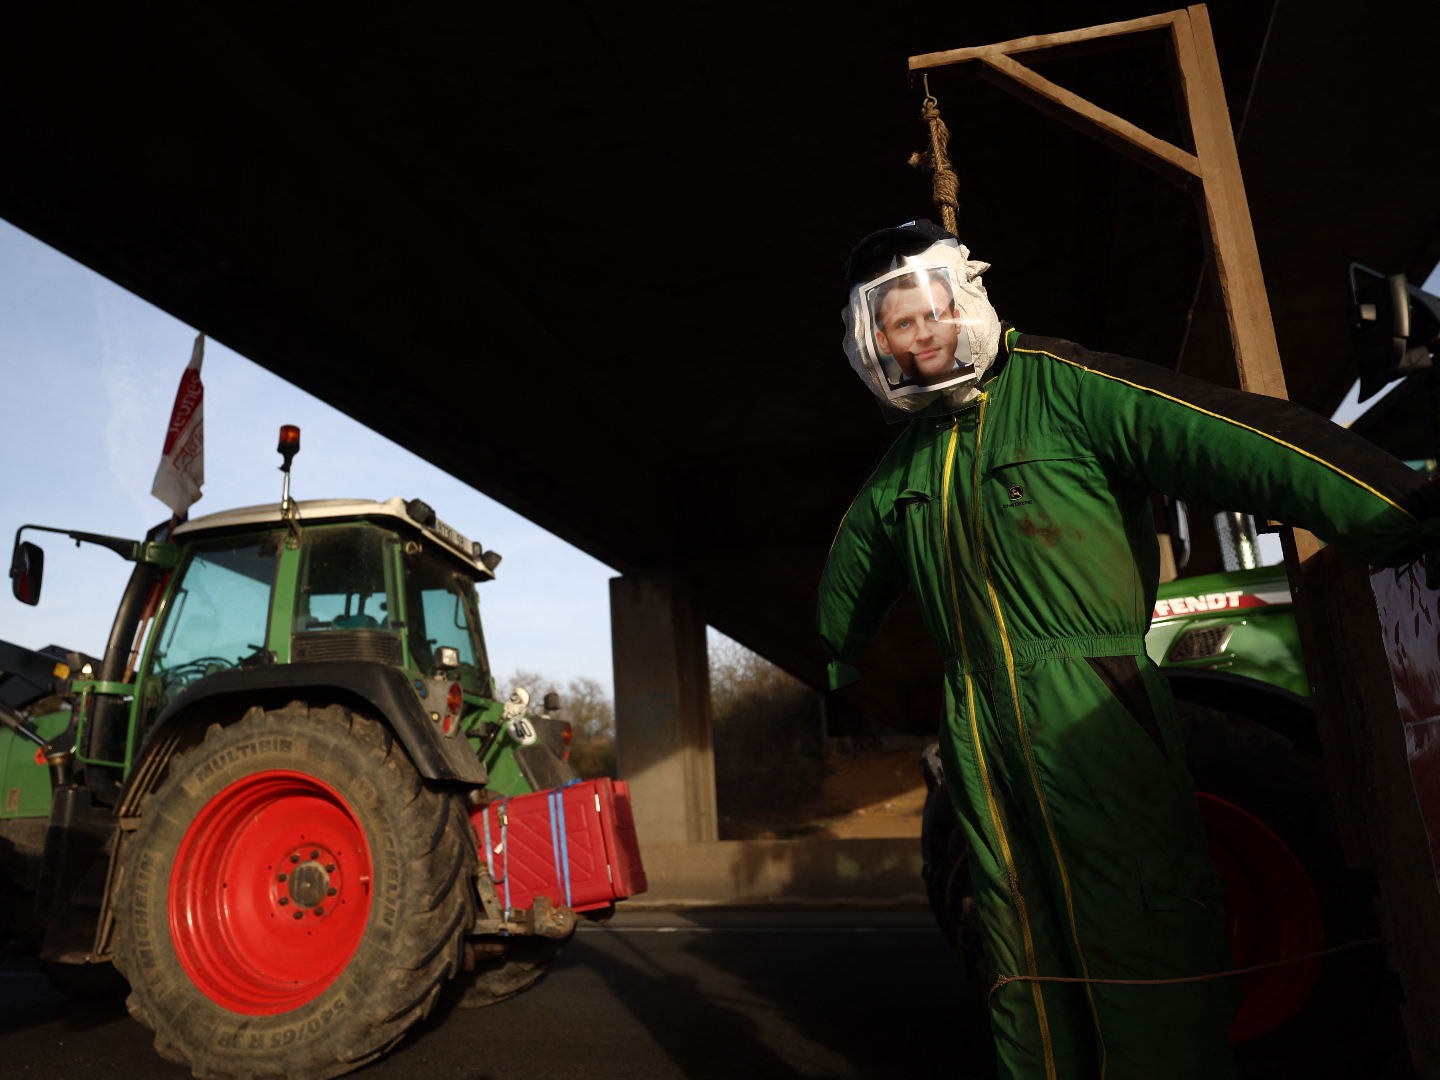 A mannequin in the effigy of French President Emmanuel Macron hangs next to tractors during a road blockage of the A6 highway near Villabe, south of Paris, on January 29, 2024, amid nationwide protests called by several farmers unions on pay, tax and regulations. Local branches of major farmer unions FNSEA and Jeunes Agriculteurs announced on January 27, 2024, a "siege of the capital for an indefinite period" starting at 2 p.m. on January 29, 2024, as some farmers deem the government's announcements in favor of the sector are insufficient. (Photo by Emmanuel Dunand / AFP) (Photo by EMMANUEL DUNAND/AFP via Getty Images)